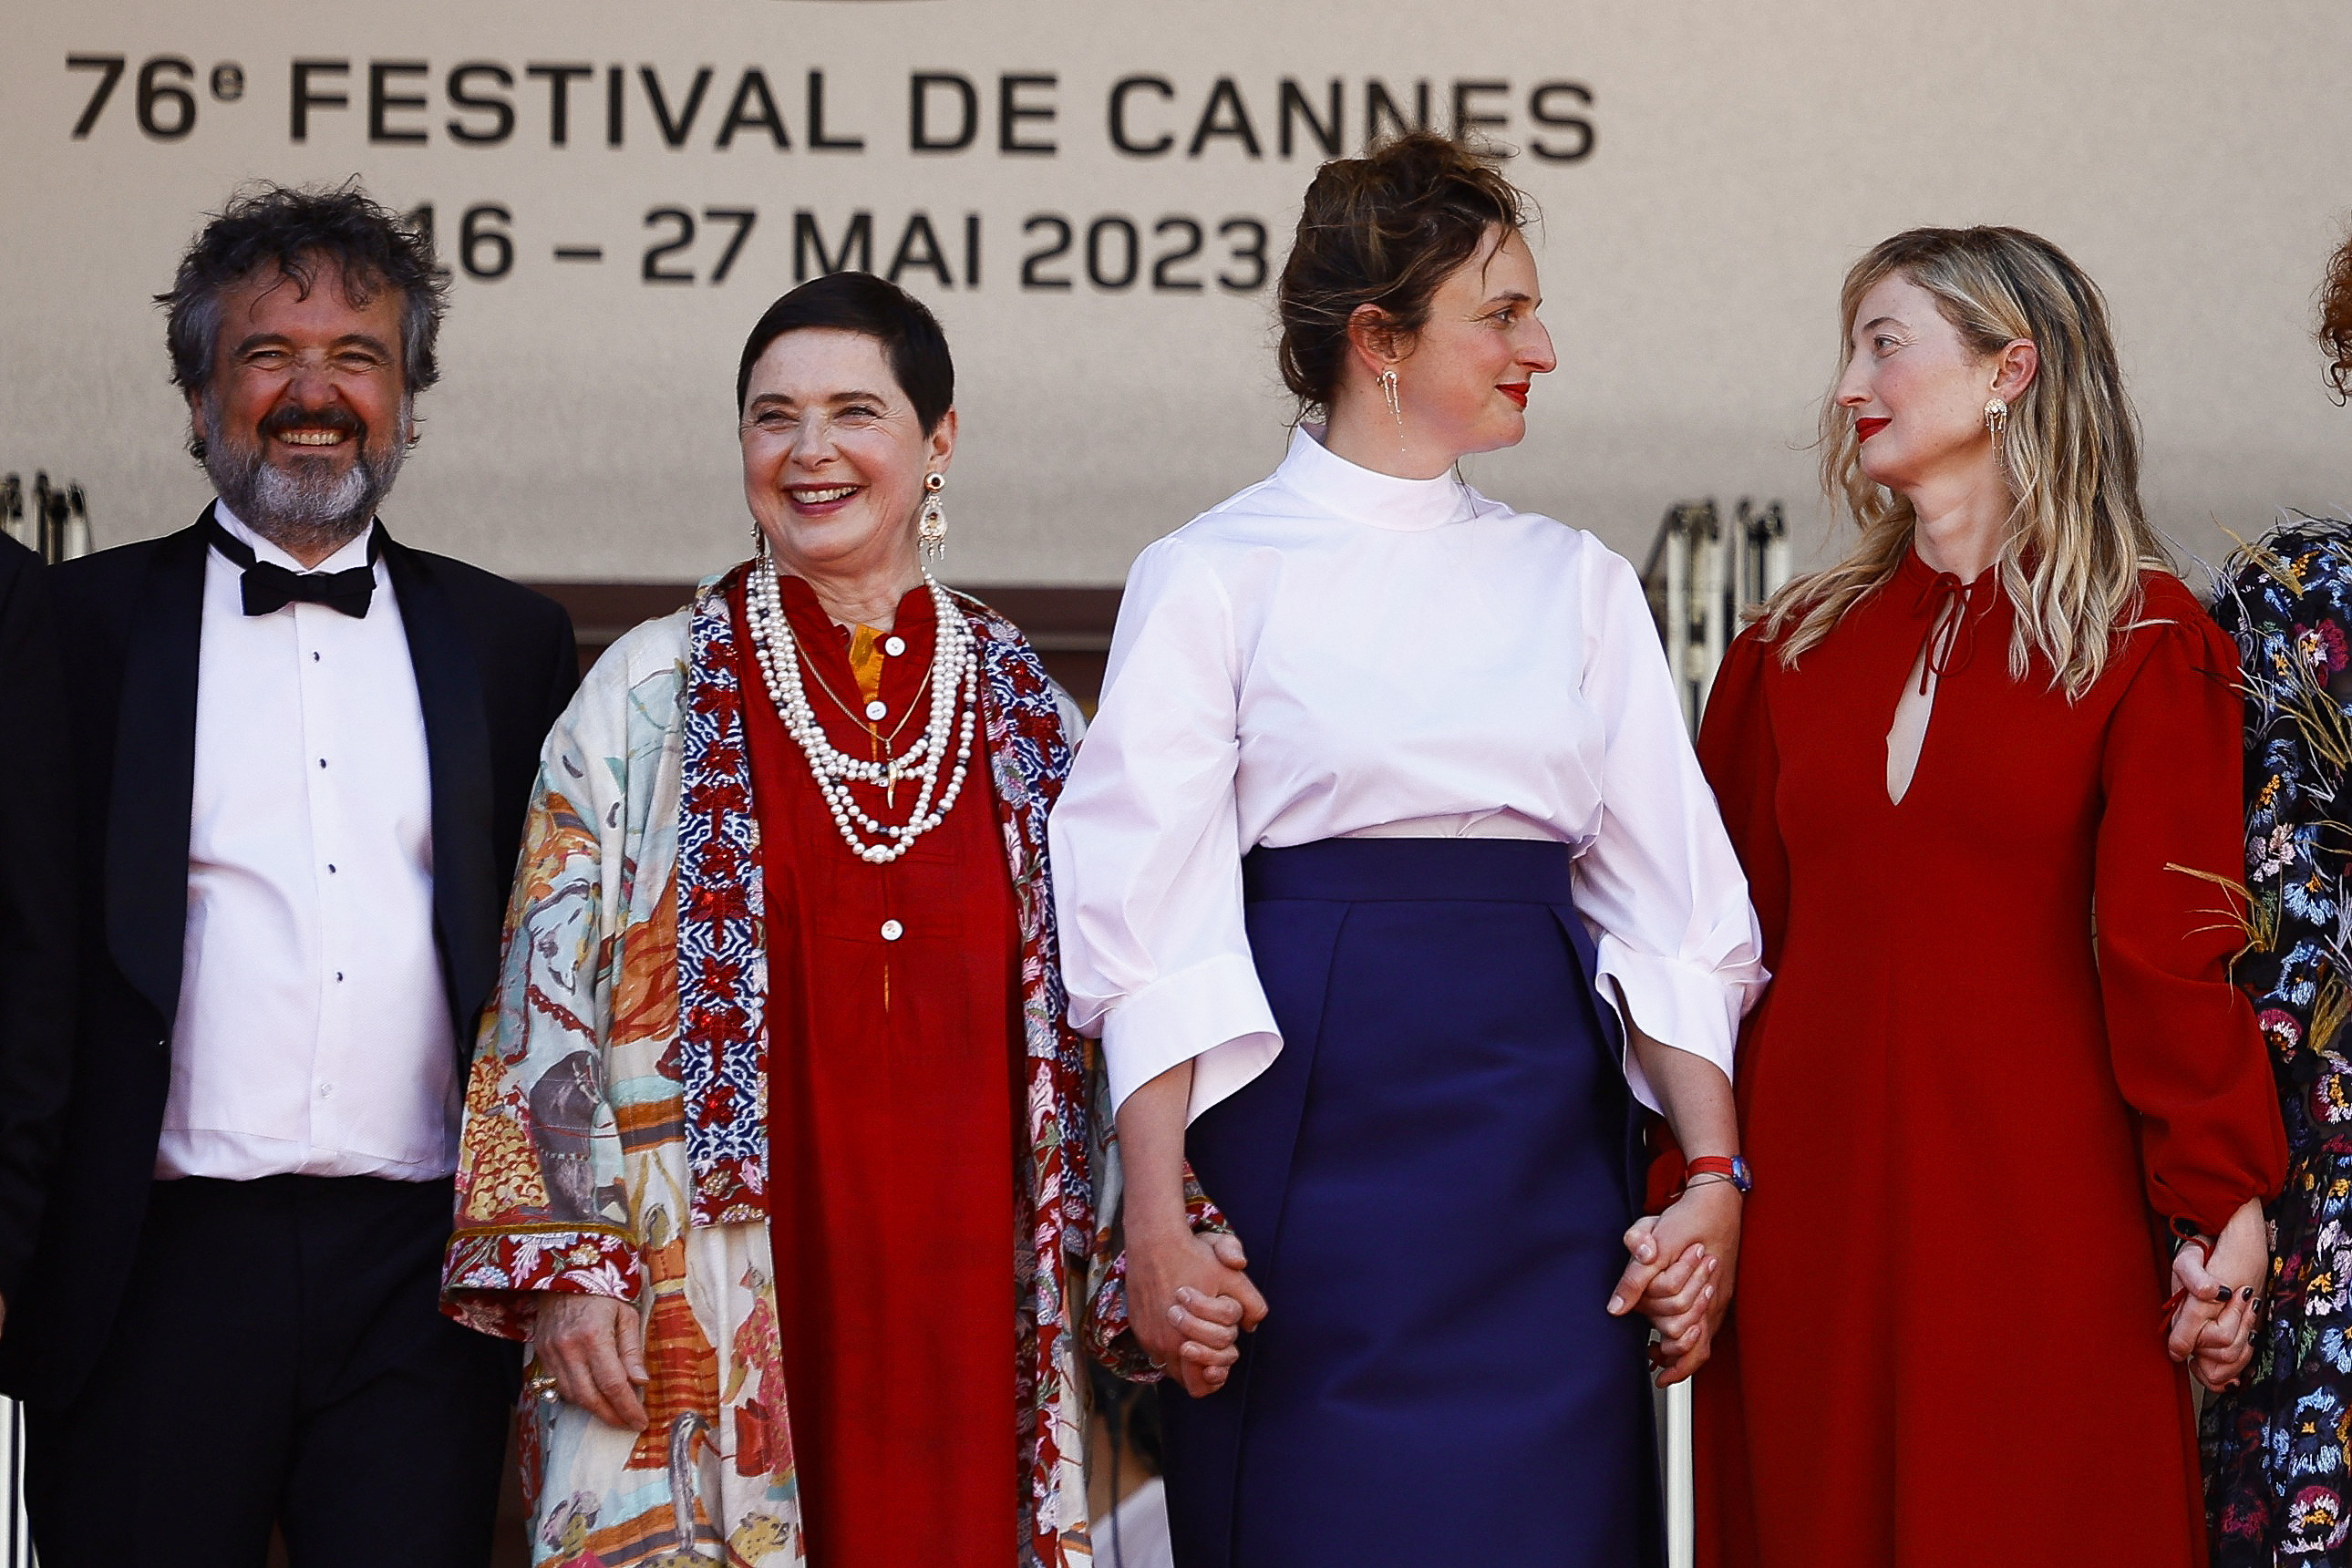 The 76th Cannes Film Festival - Screening of the film "La chimera" in competition - Red Carpet Arrivals